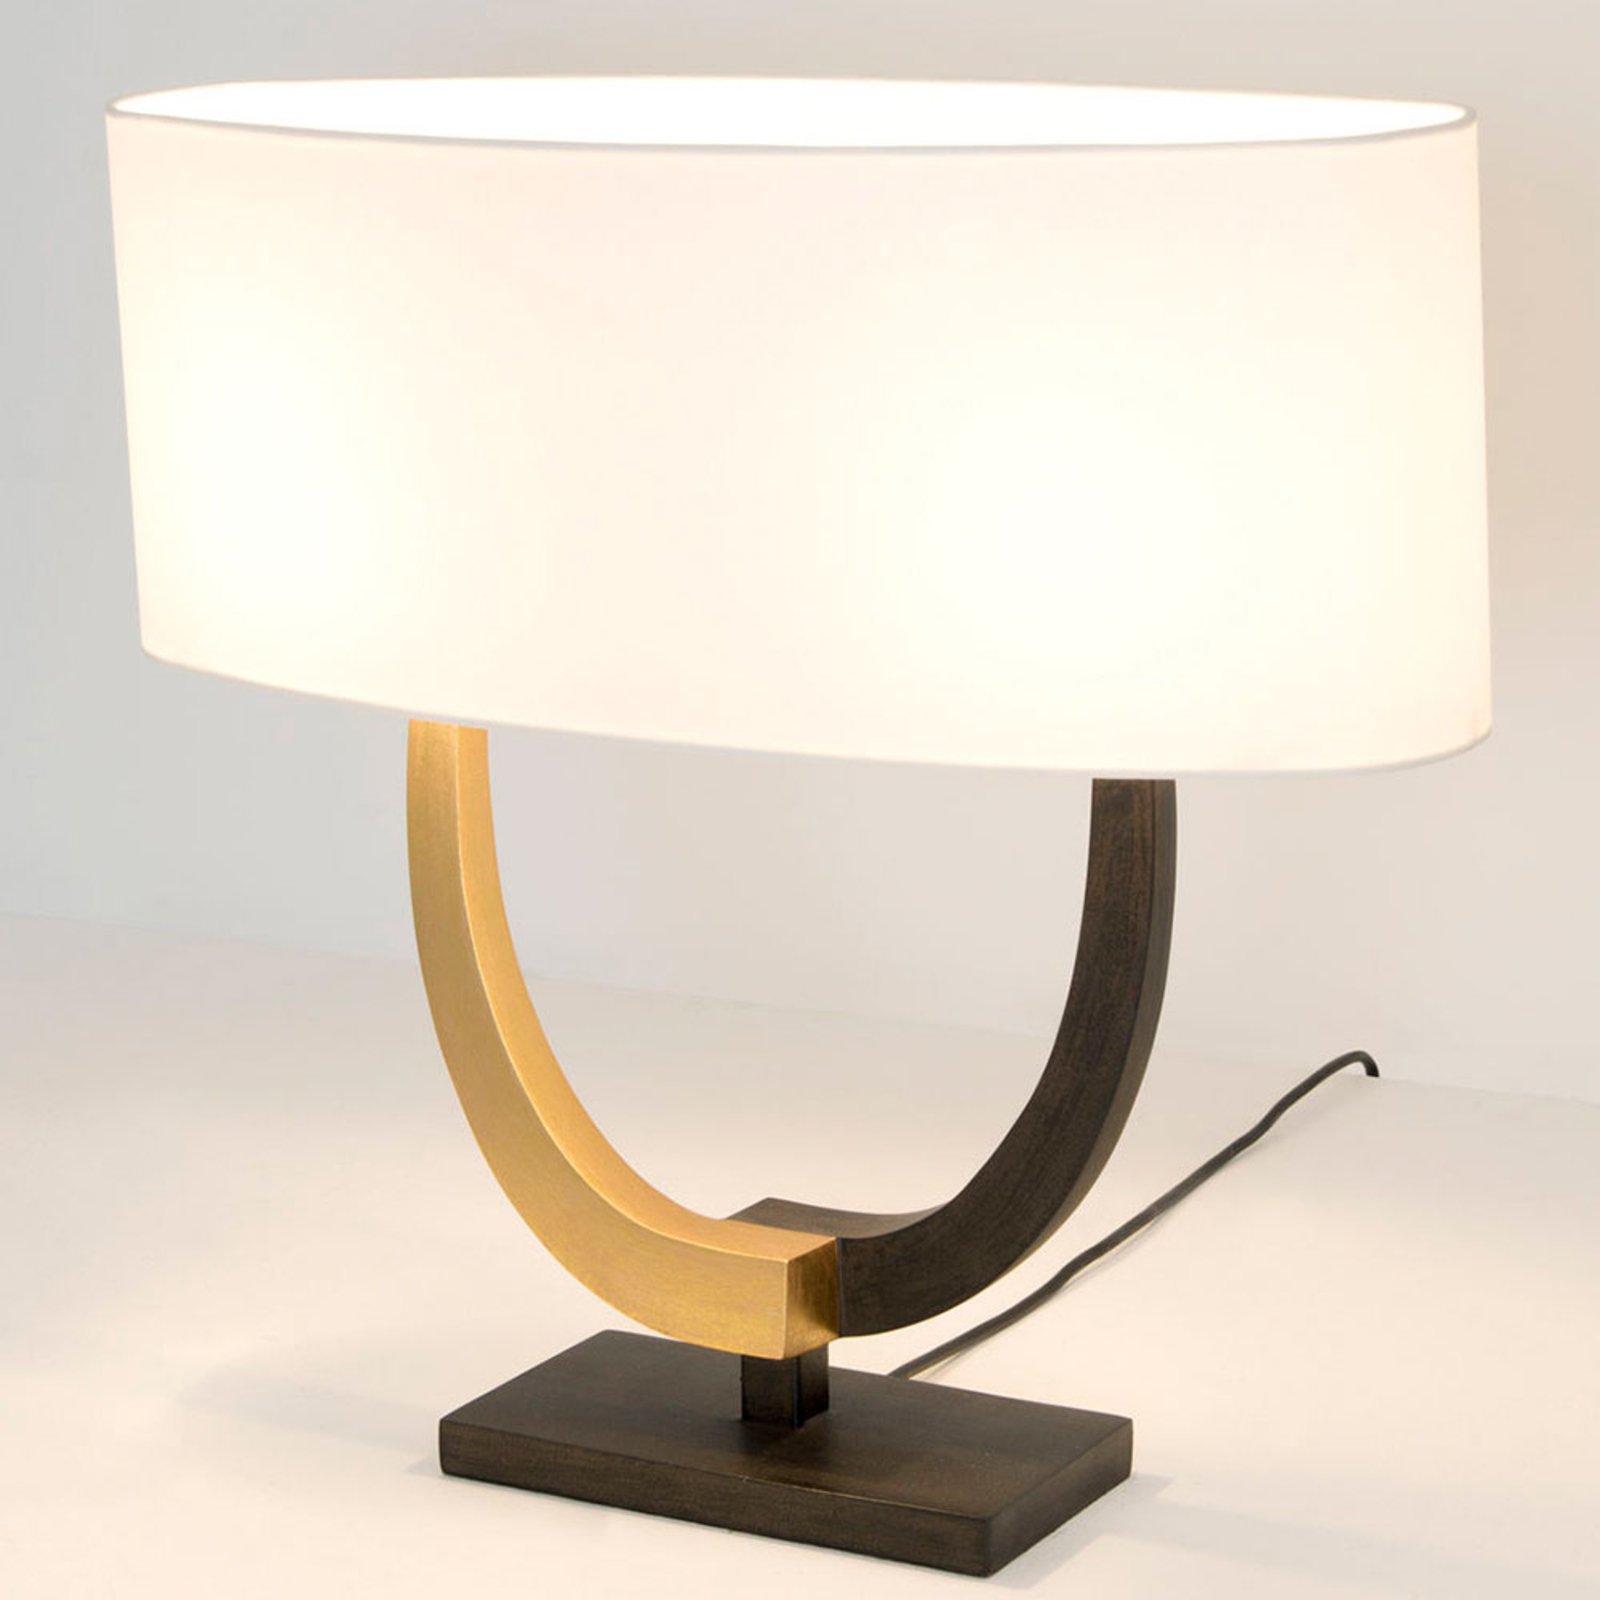 Cattedrale table lamp with oval lampshade